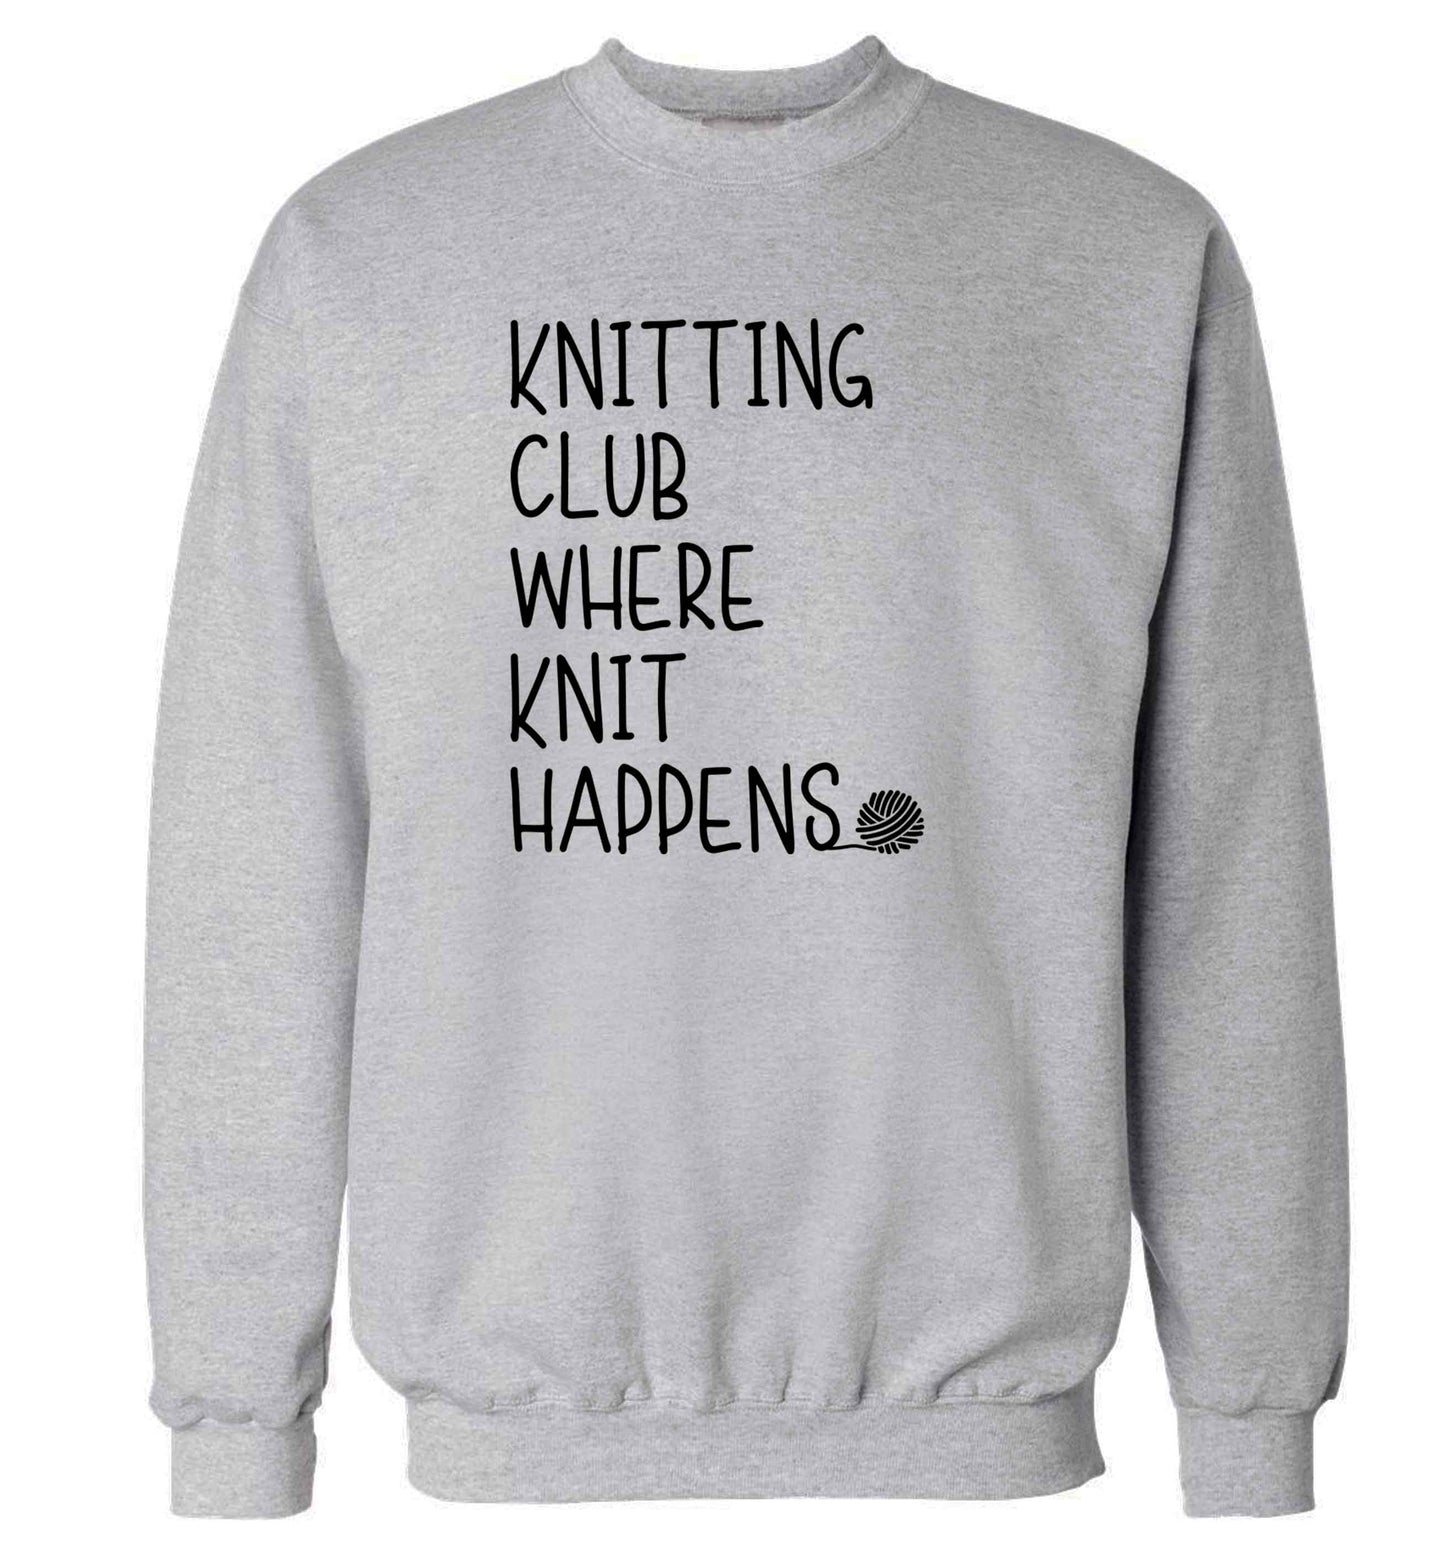 Knitting club where knit happens adult's unisex grey sweater 2XL